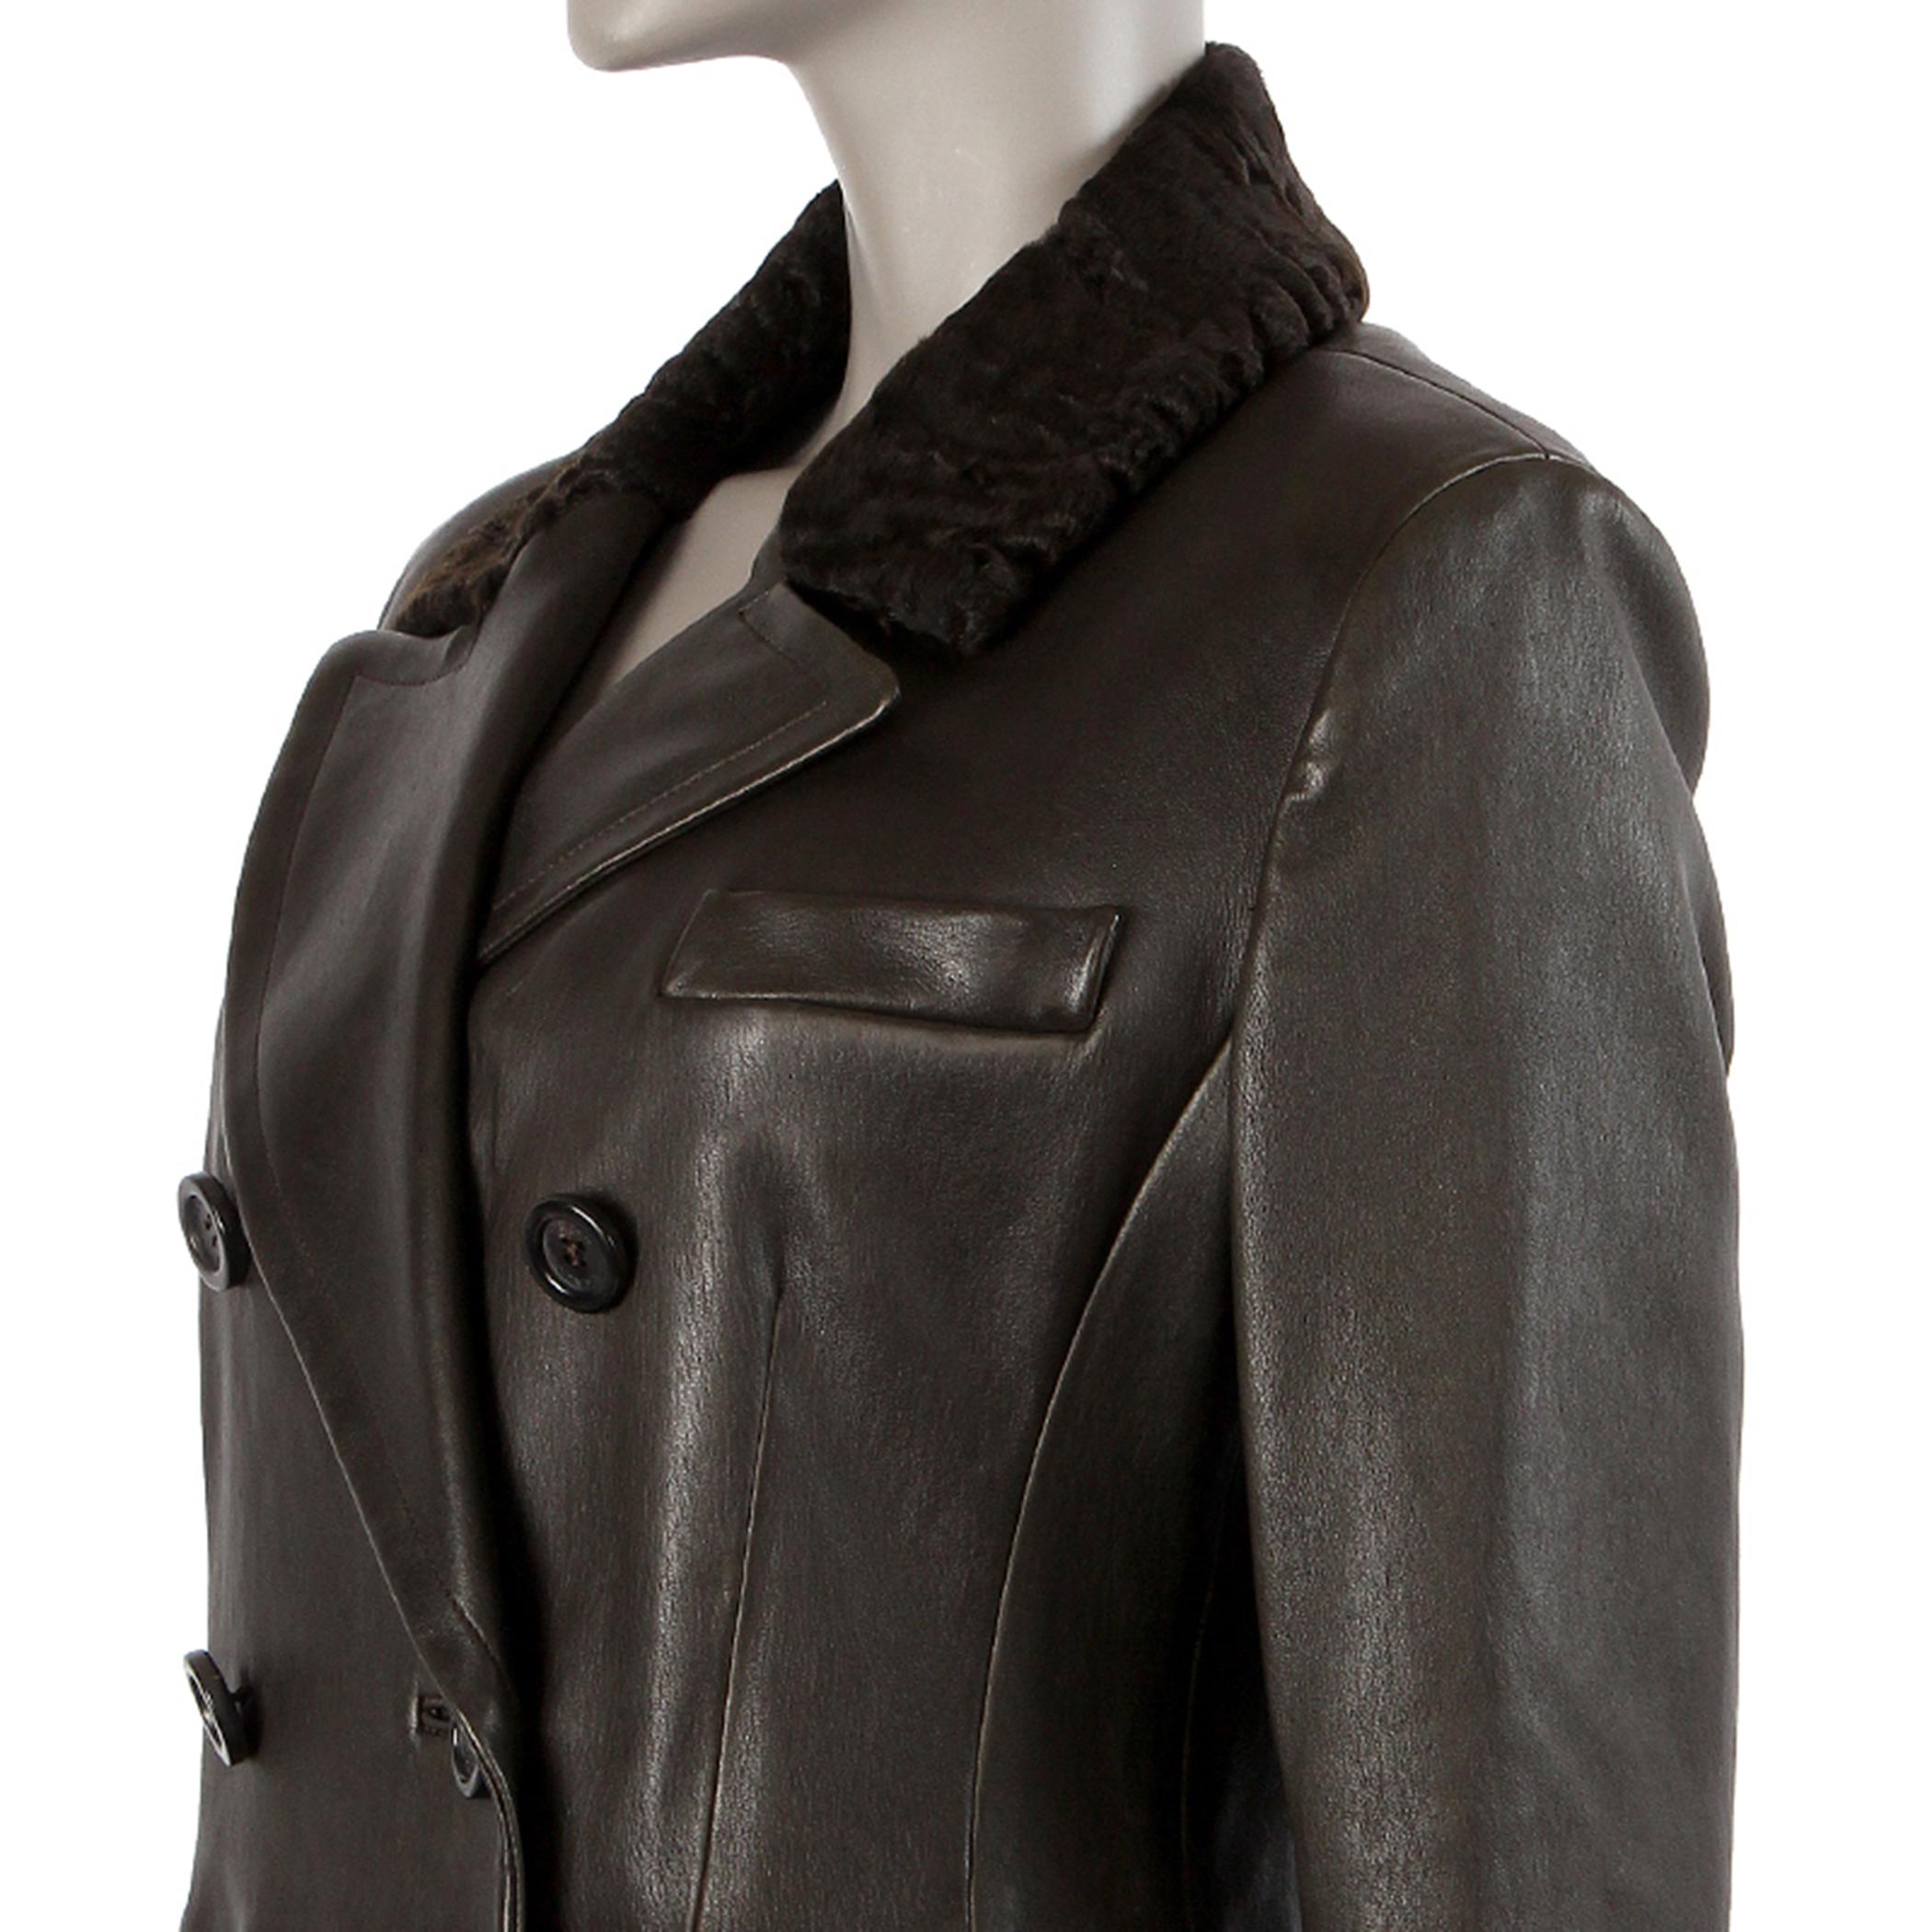 100% authentic Prada double-breasted coat in forest green lambskin with notch collar in dark brown Persian lamb fur, two front flap pockets, and chest pocket. Closes with dark brown brand buttons. Lined in olive green fabric. Has been worn and is in